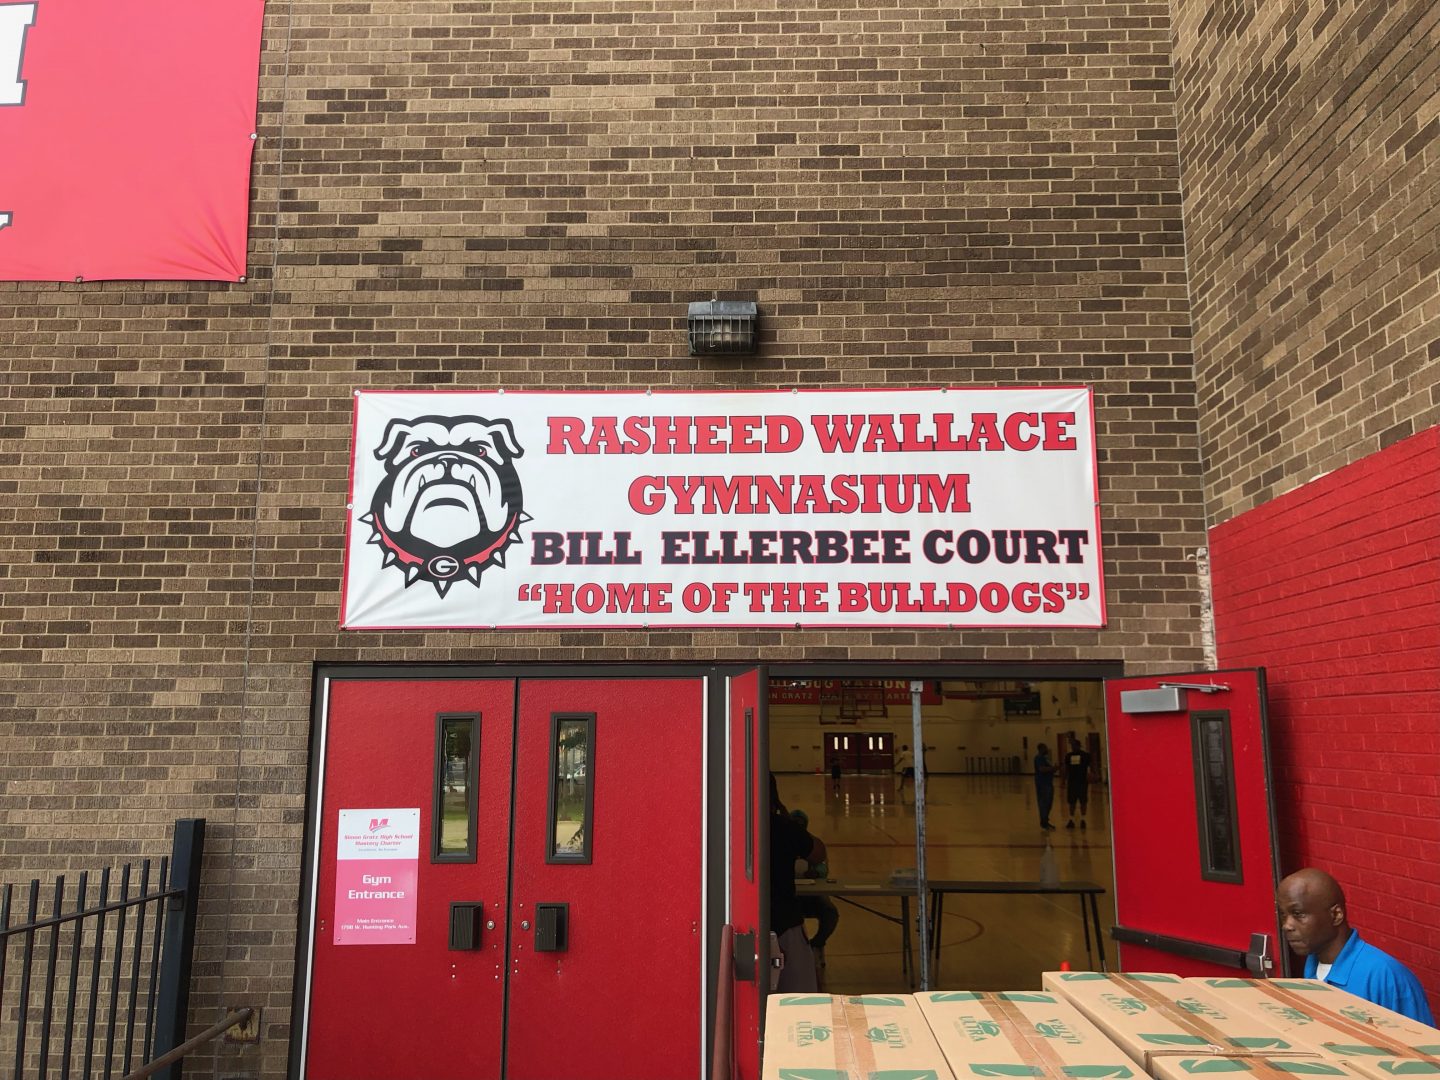 Native Son: Rasheed Wallace’s Impact on Philadelphia is Honored With a Street Sign Named After Him